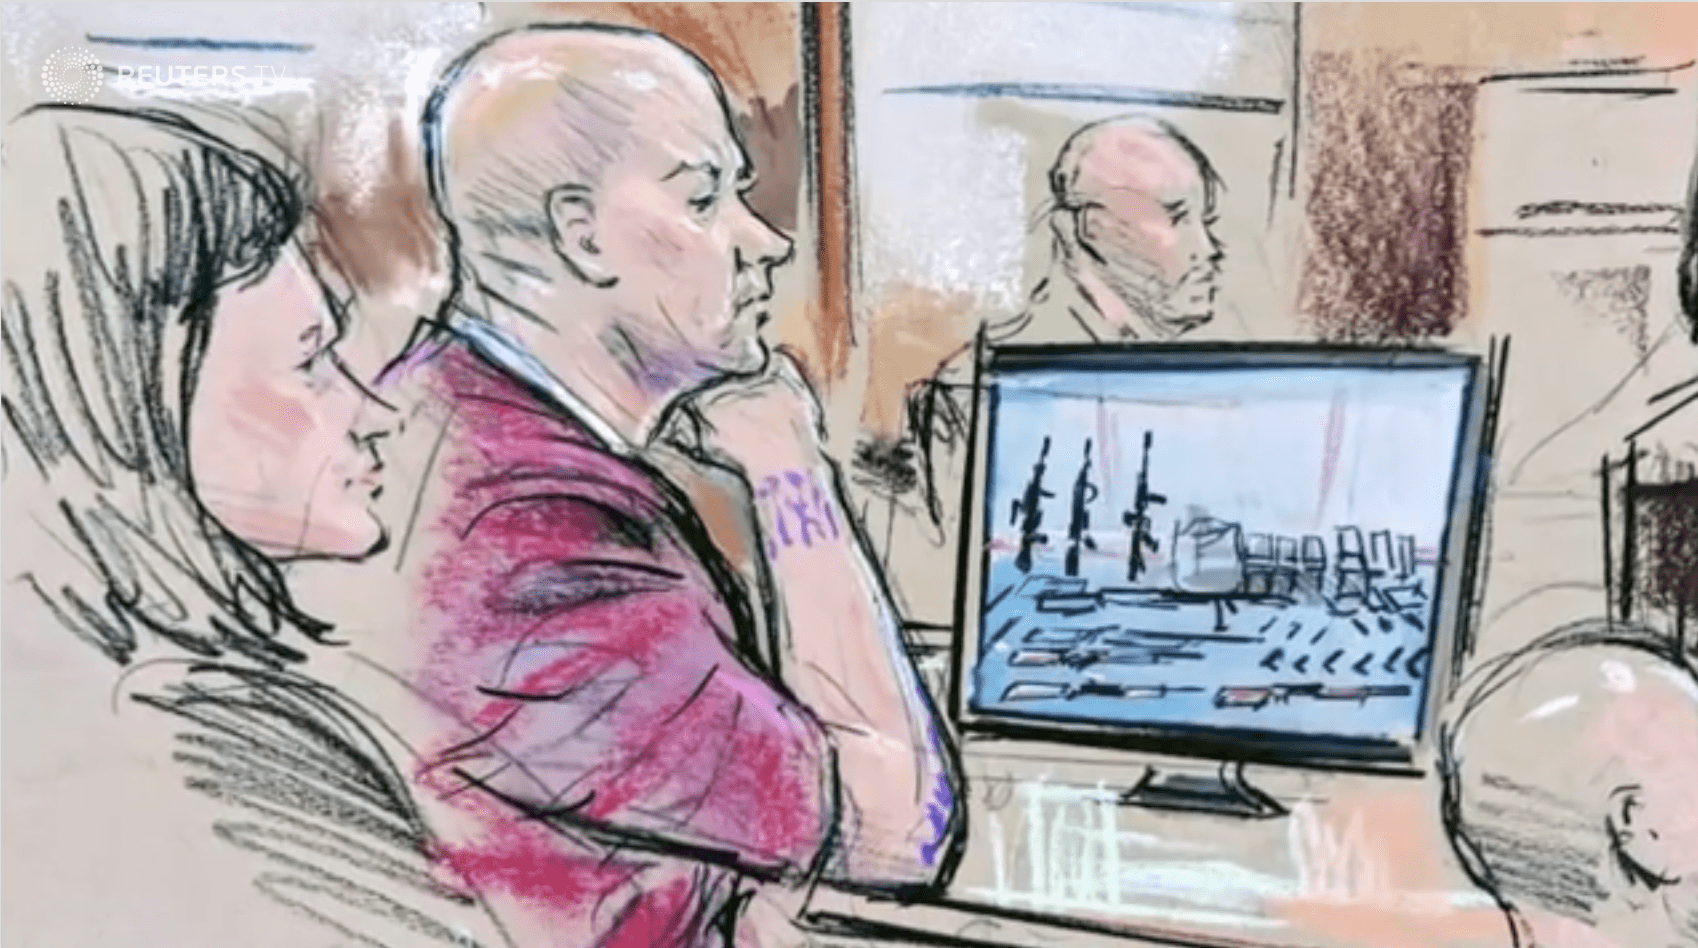 US Coast Guard Officer Suspected Of Terror Plot Faces Charges